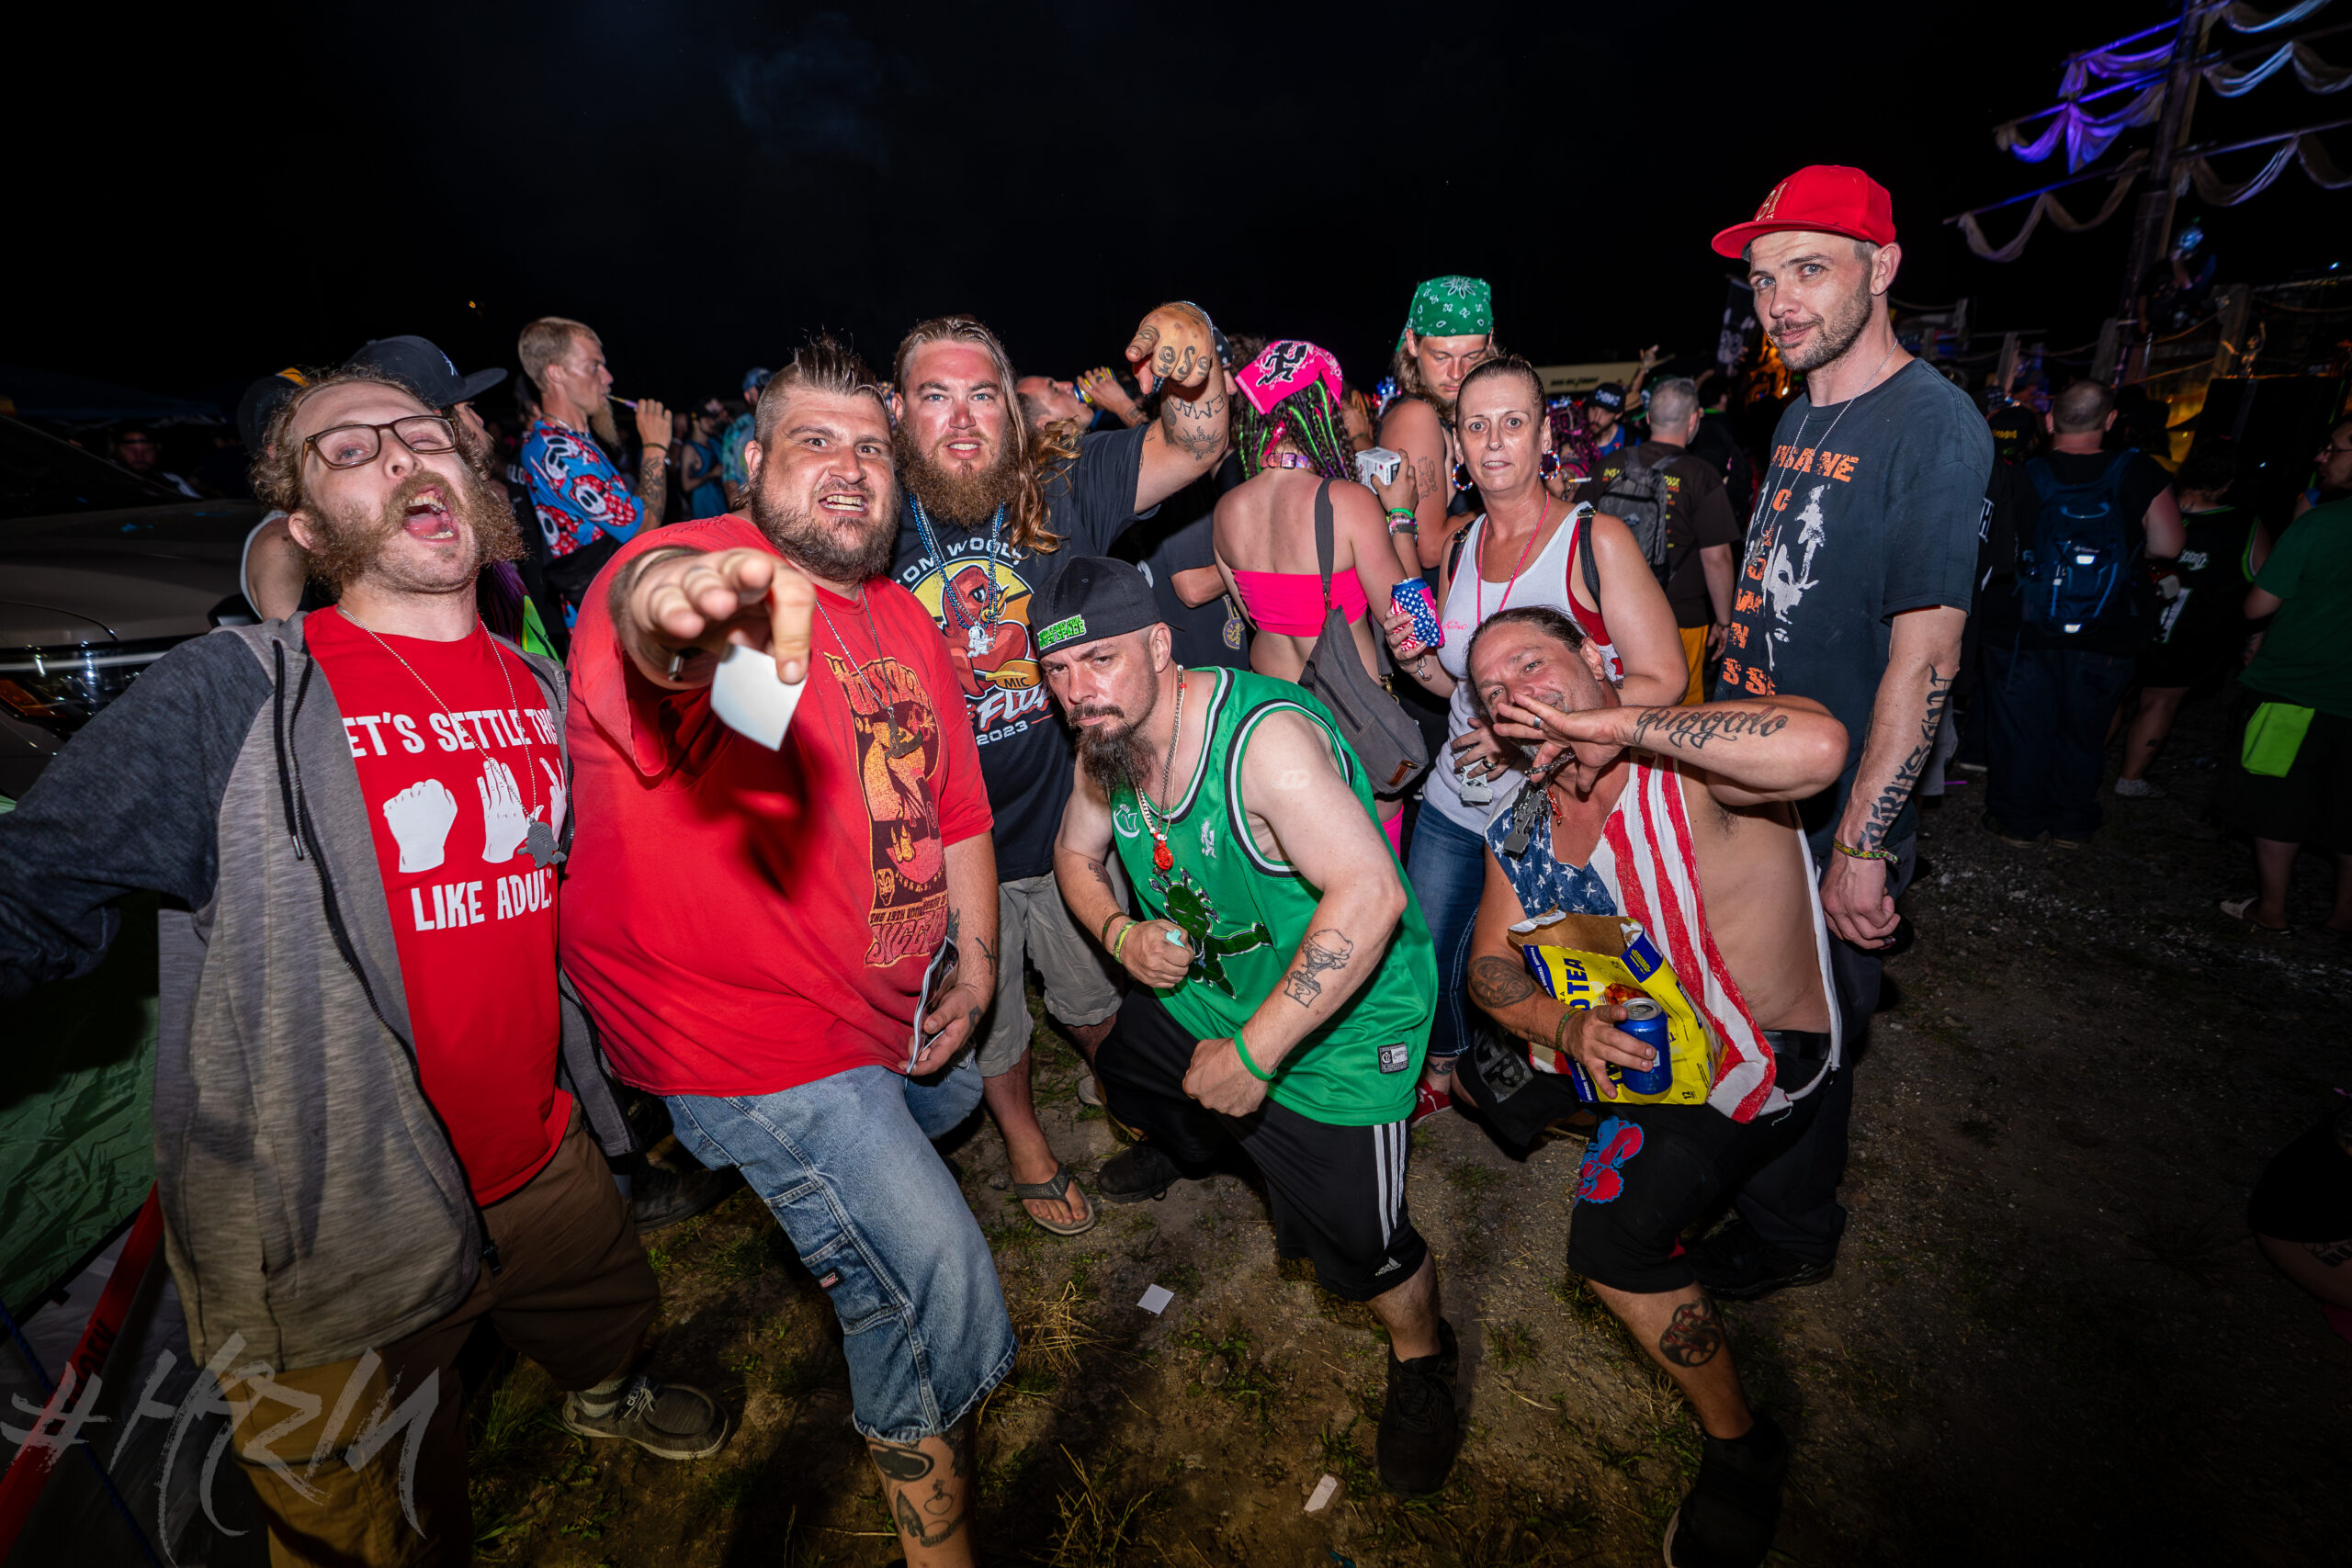 Juggalo News – YOUR #1 SOURCE FOR THE WICKED SHIT!